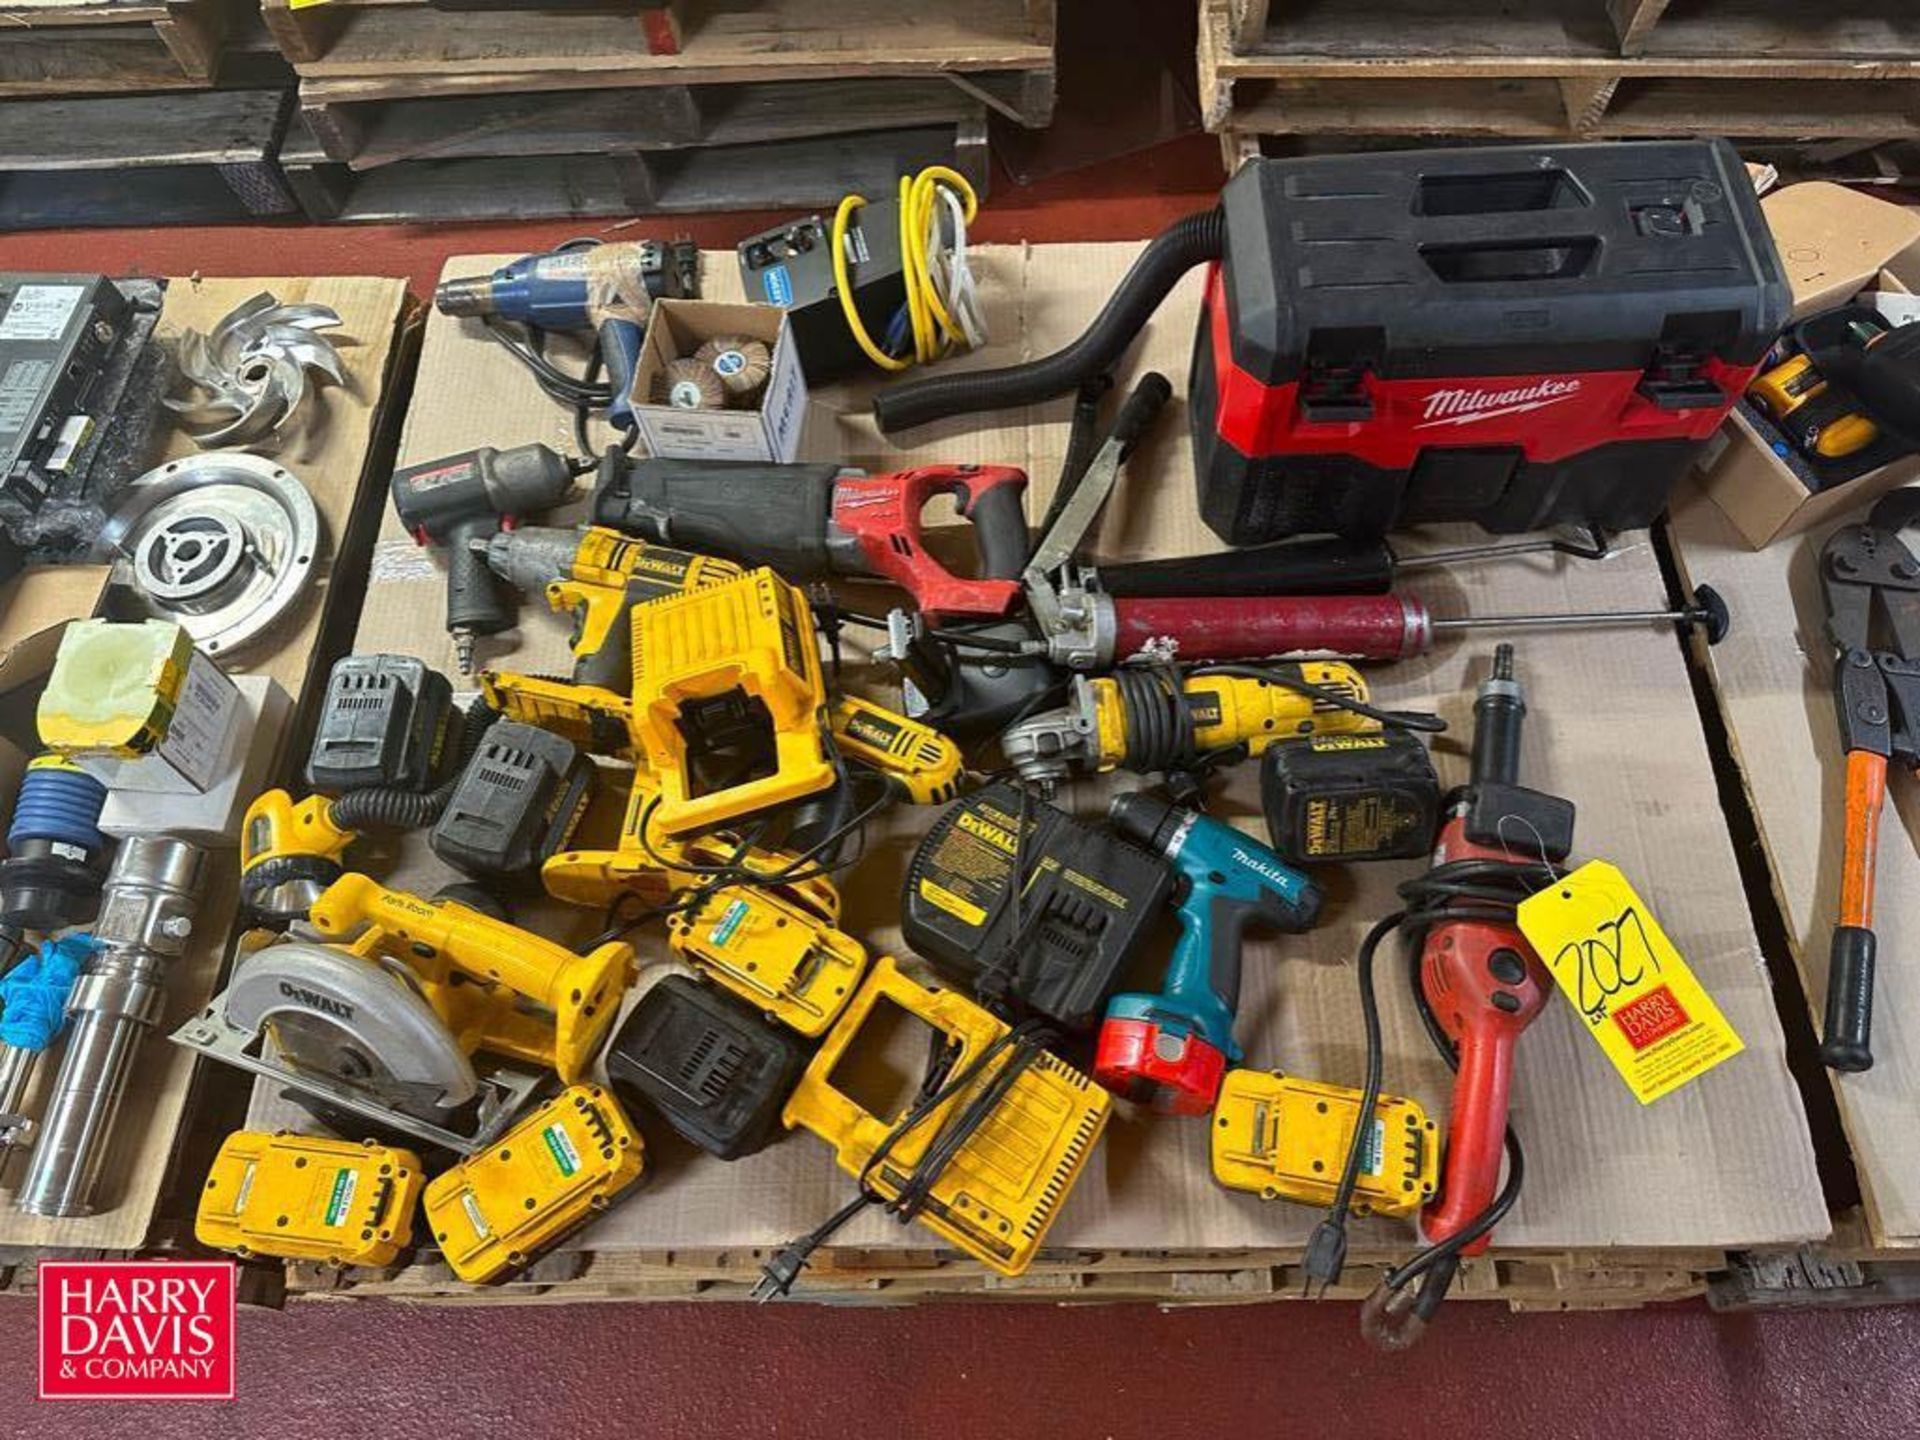 Assorted Power Tools, Batteries, Chargers and Grease Guns - Rigging Fee: $50